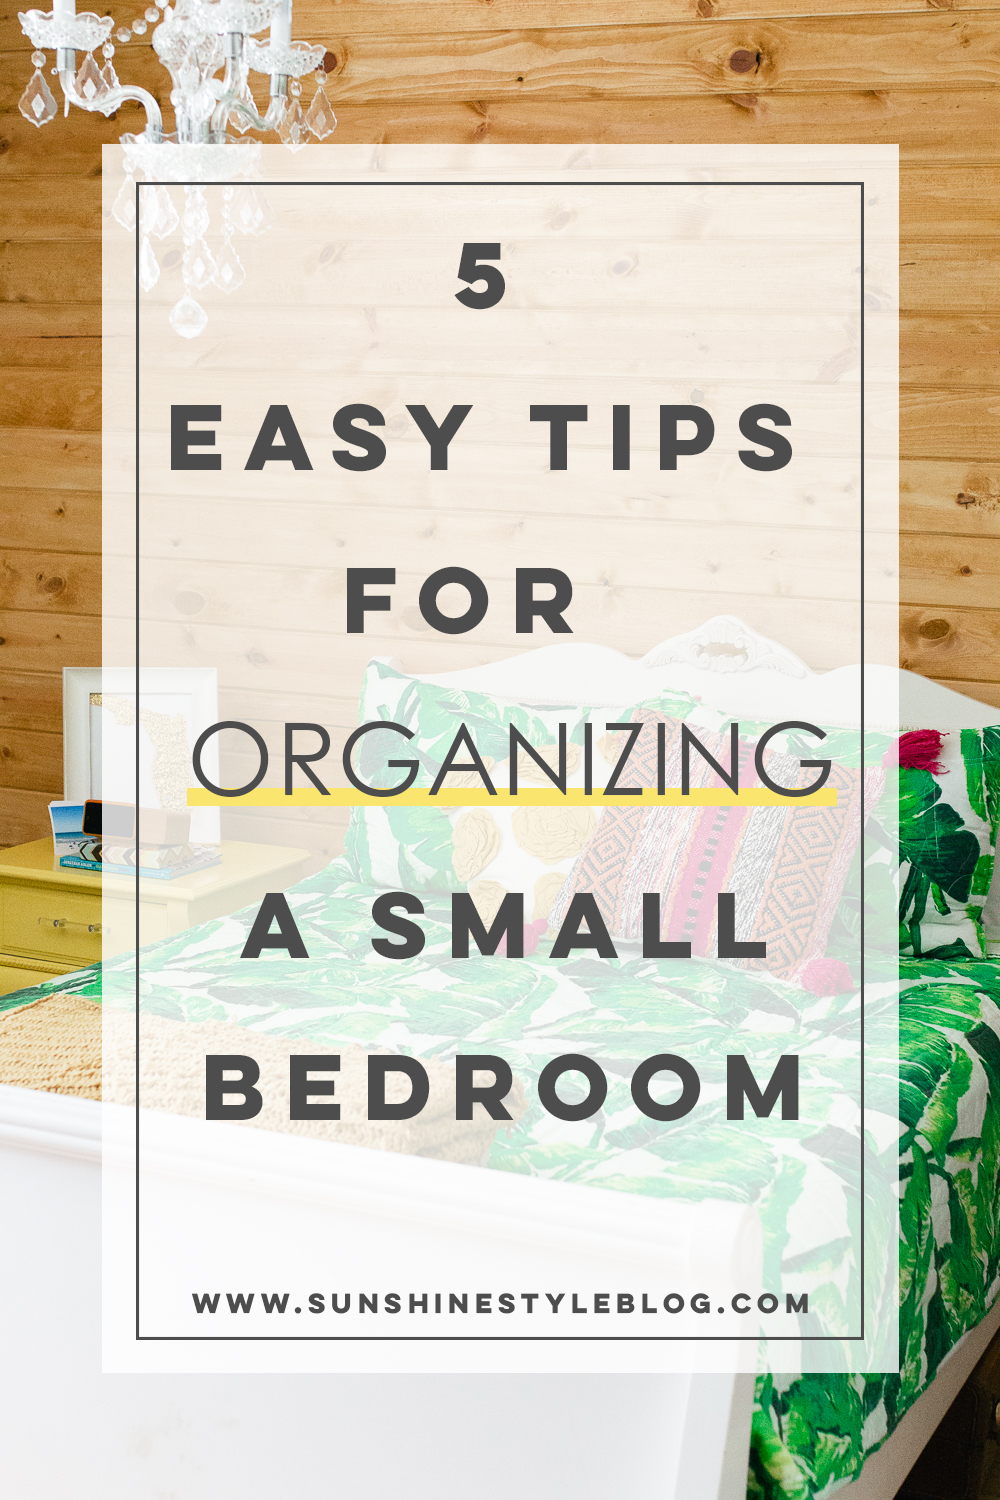 5 Easy Tips or Organize a Small Bedroom by Sunshine Style a Florida Fashion & Lifestyle Blog | Organization Tips | Small Bedroom Decor | Boho Decor | Tropical Bedroom Decor #decor #organize #organization #bedroom #decorate